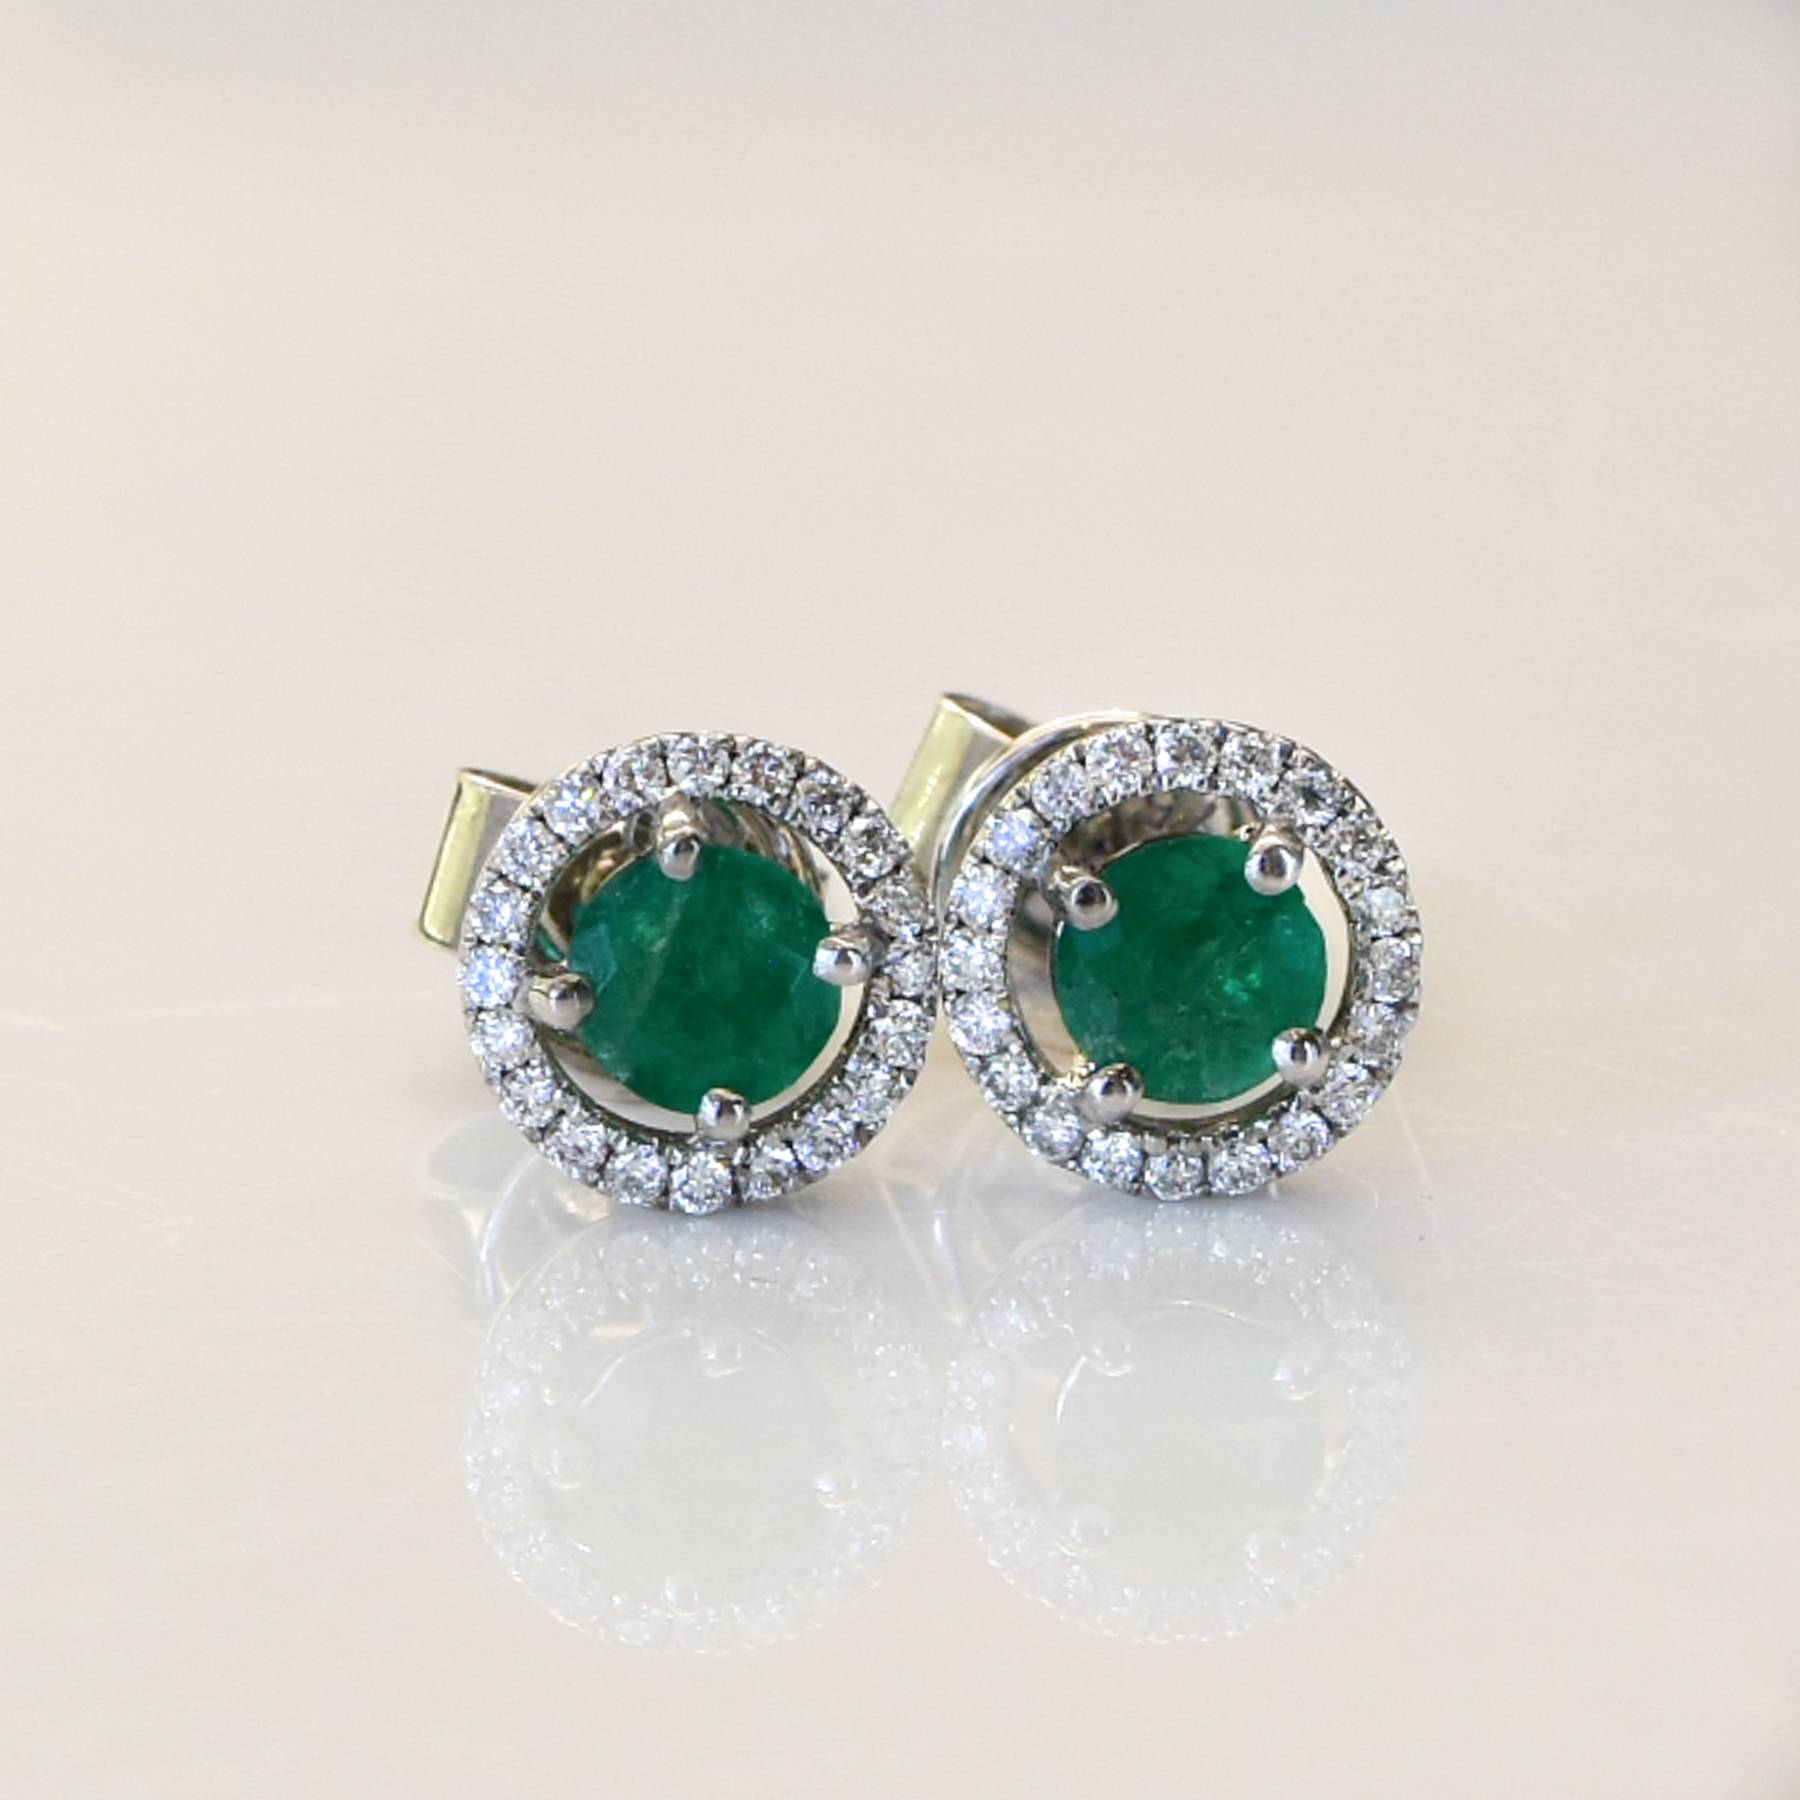 0.70ct Colombian Emerald And Diamond Stud Earrings In 18K White Gold